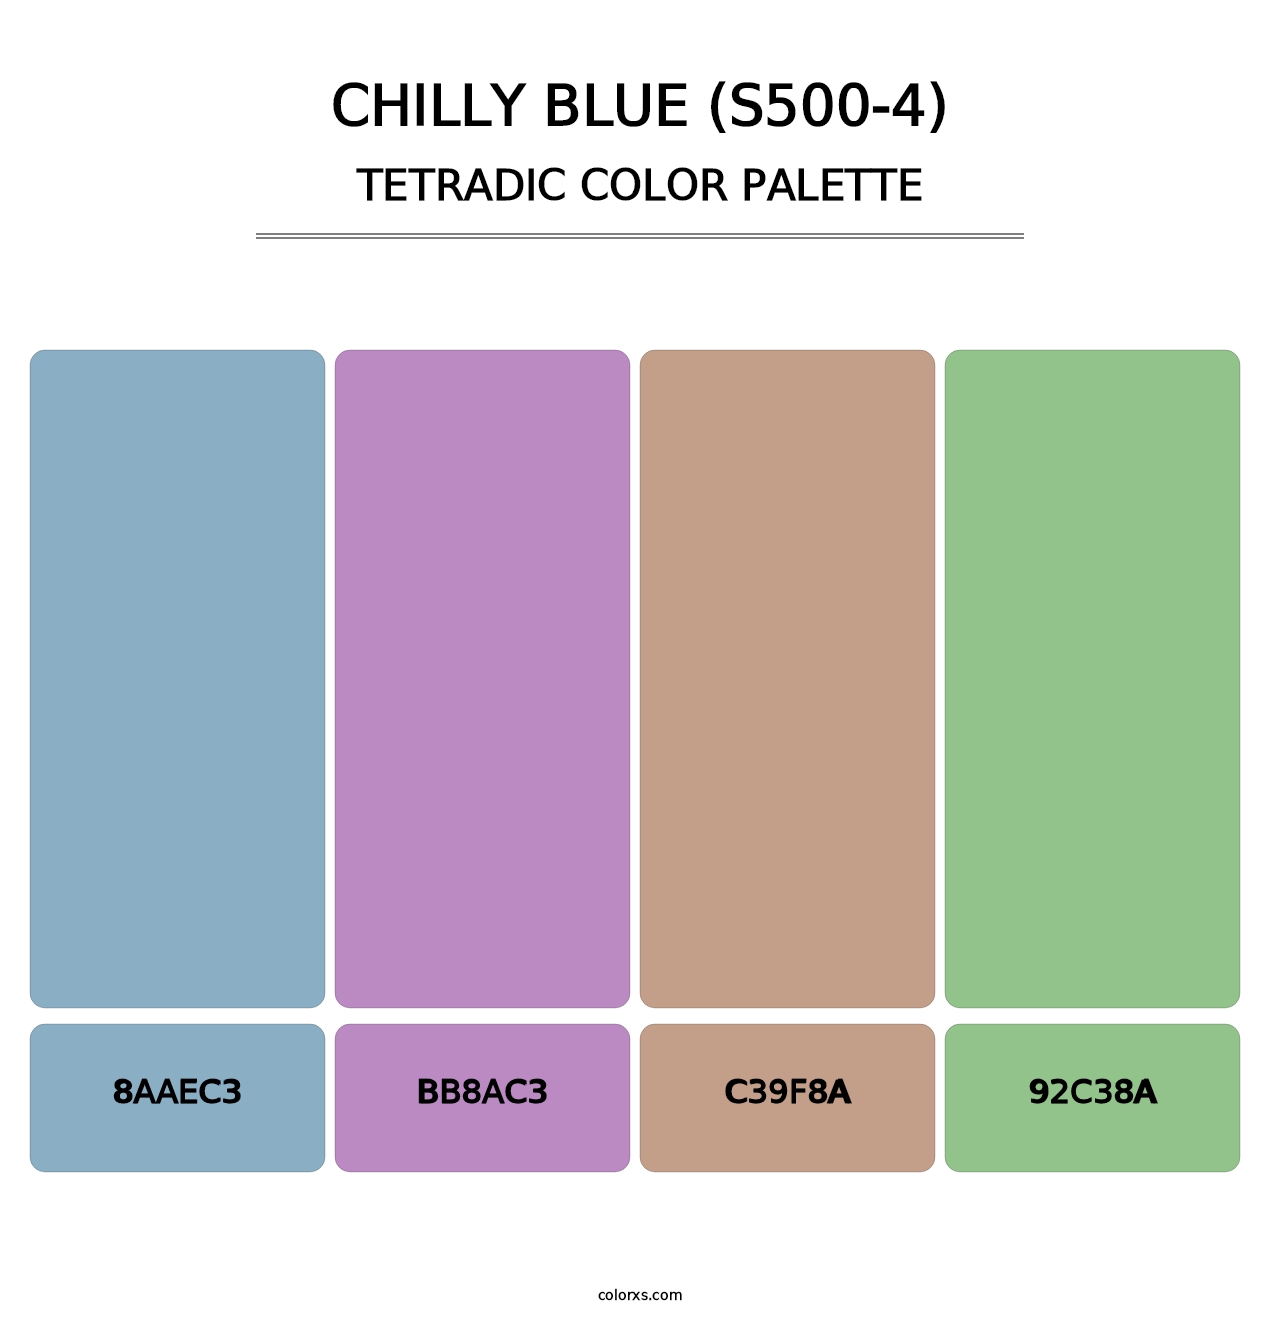 Chilly Blue (S500-4) - Tetradic Color Palette